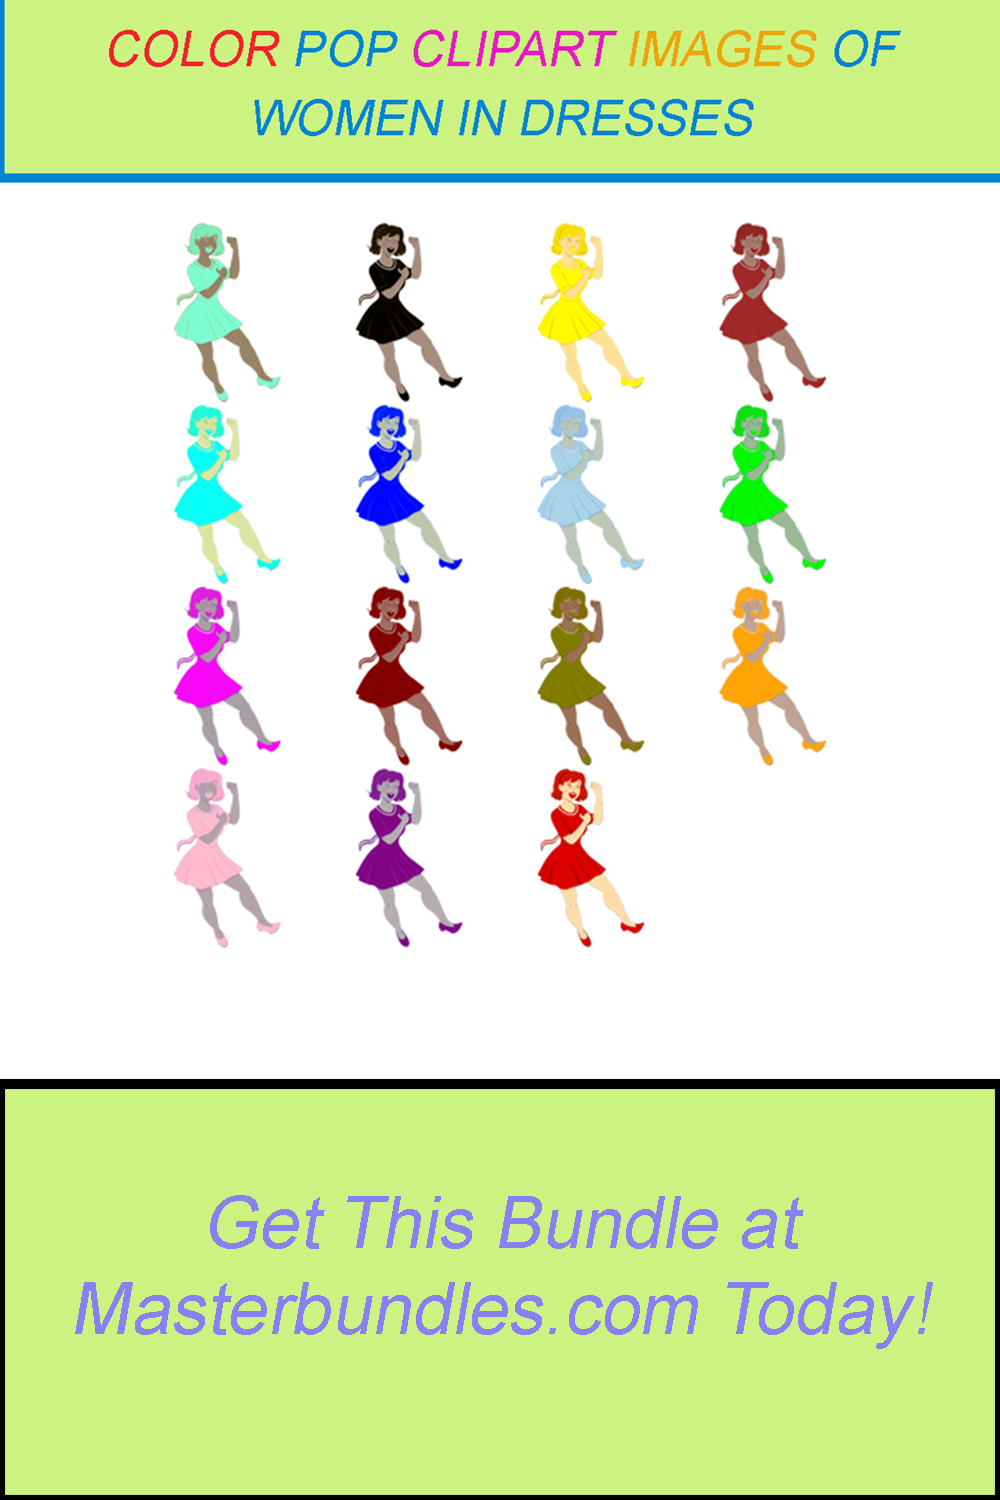 15 COLOR POP CLIPART IMAGES OF WOMEN IN DRESSES pinterest preview image.